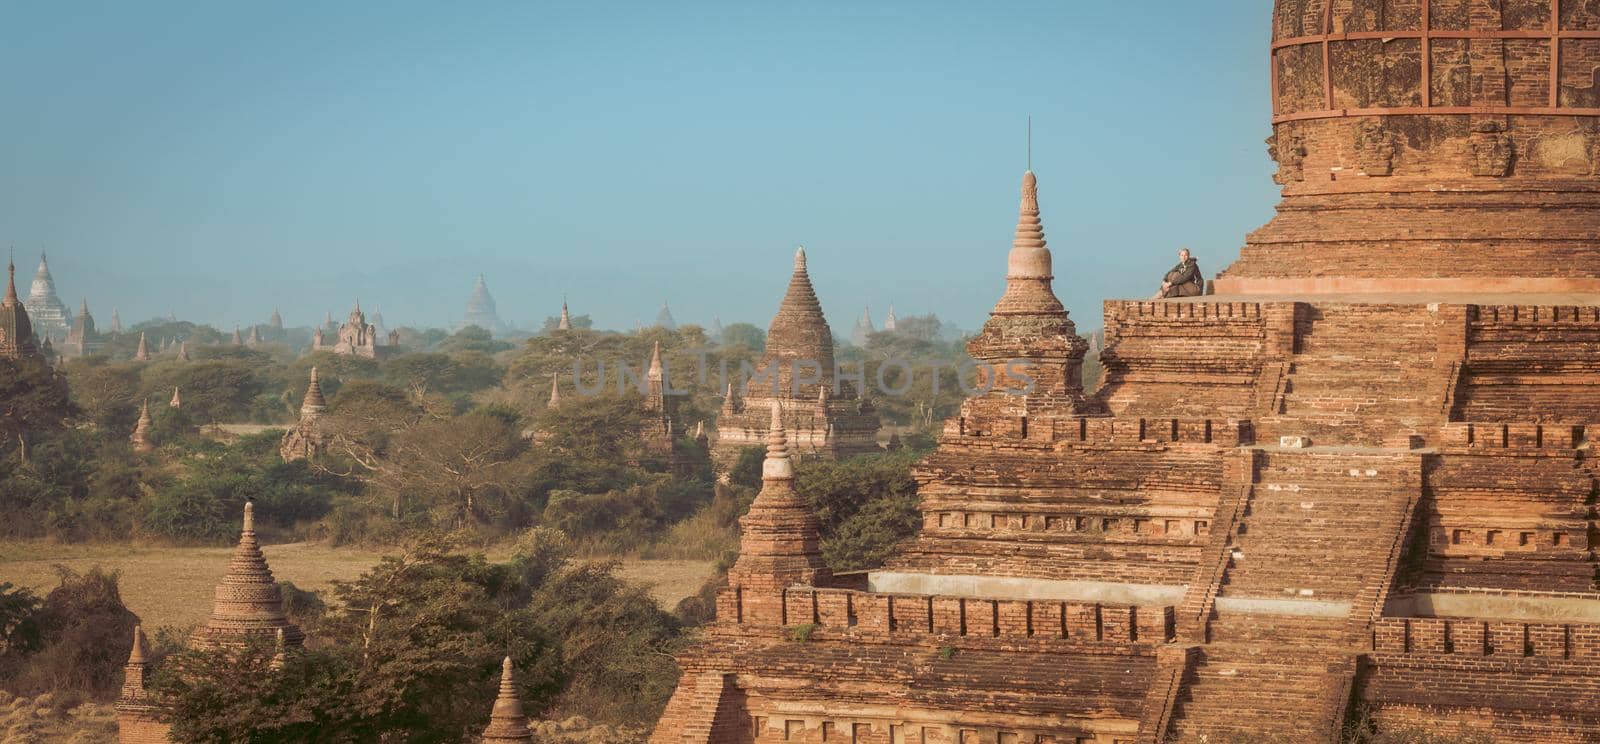 Temples of Bagan an ancient city located in the Mandalay Region of Burma, Myanmar, Asia. by kasto